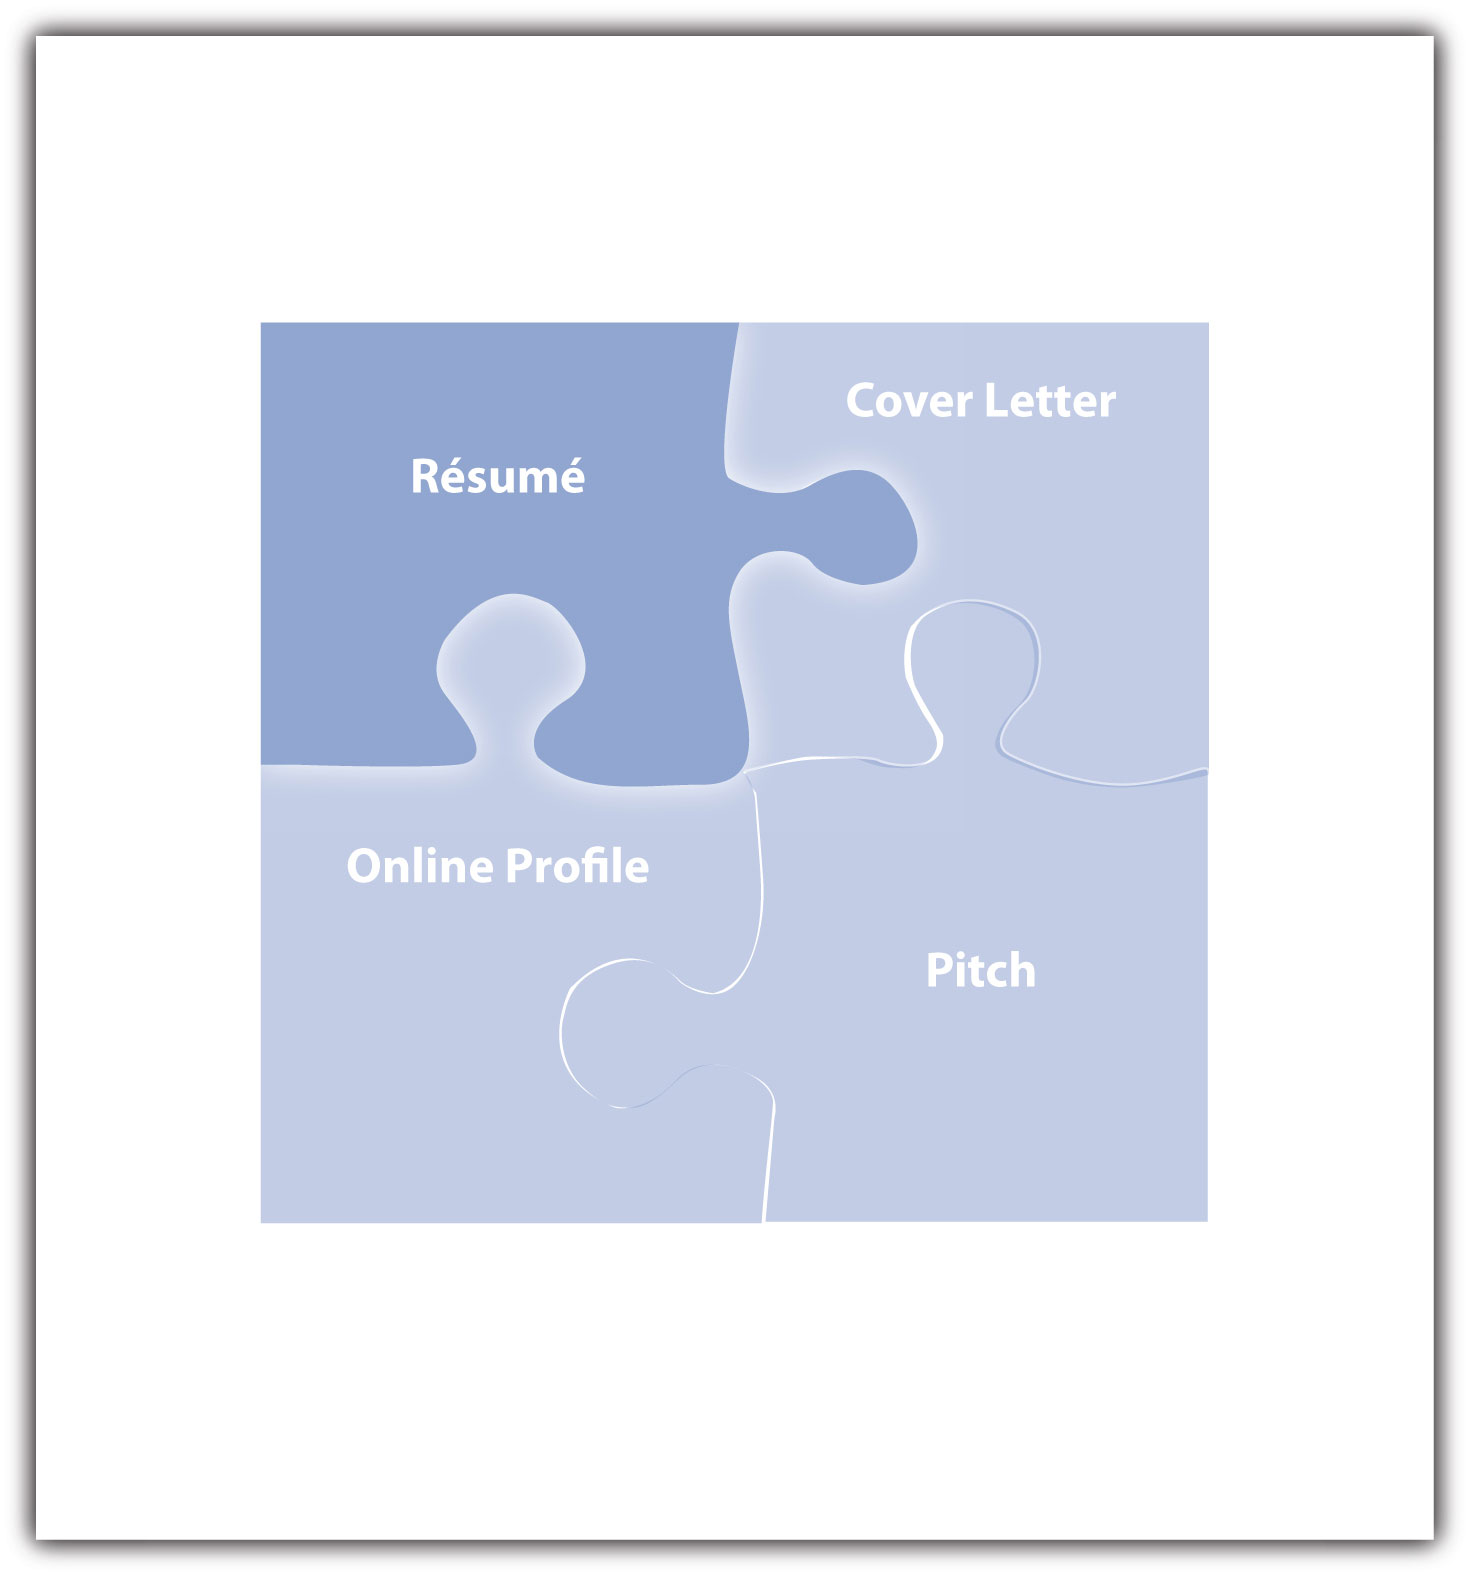 Components of a well written cover letter